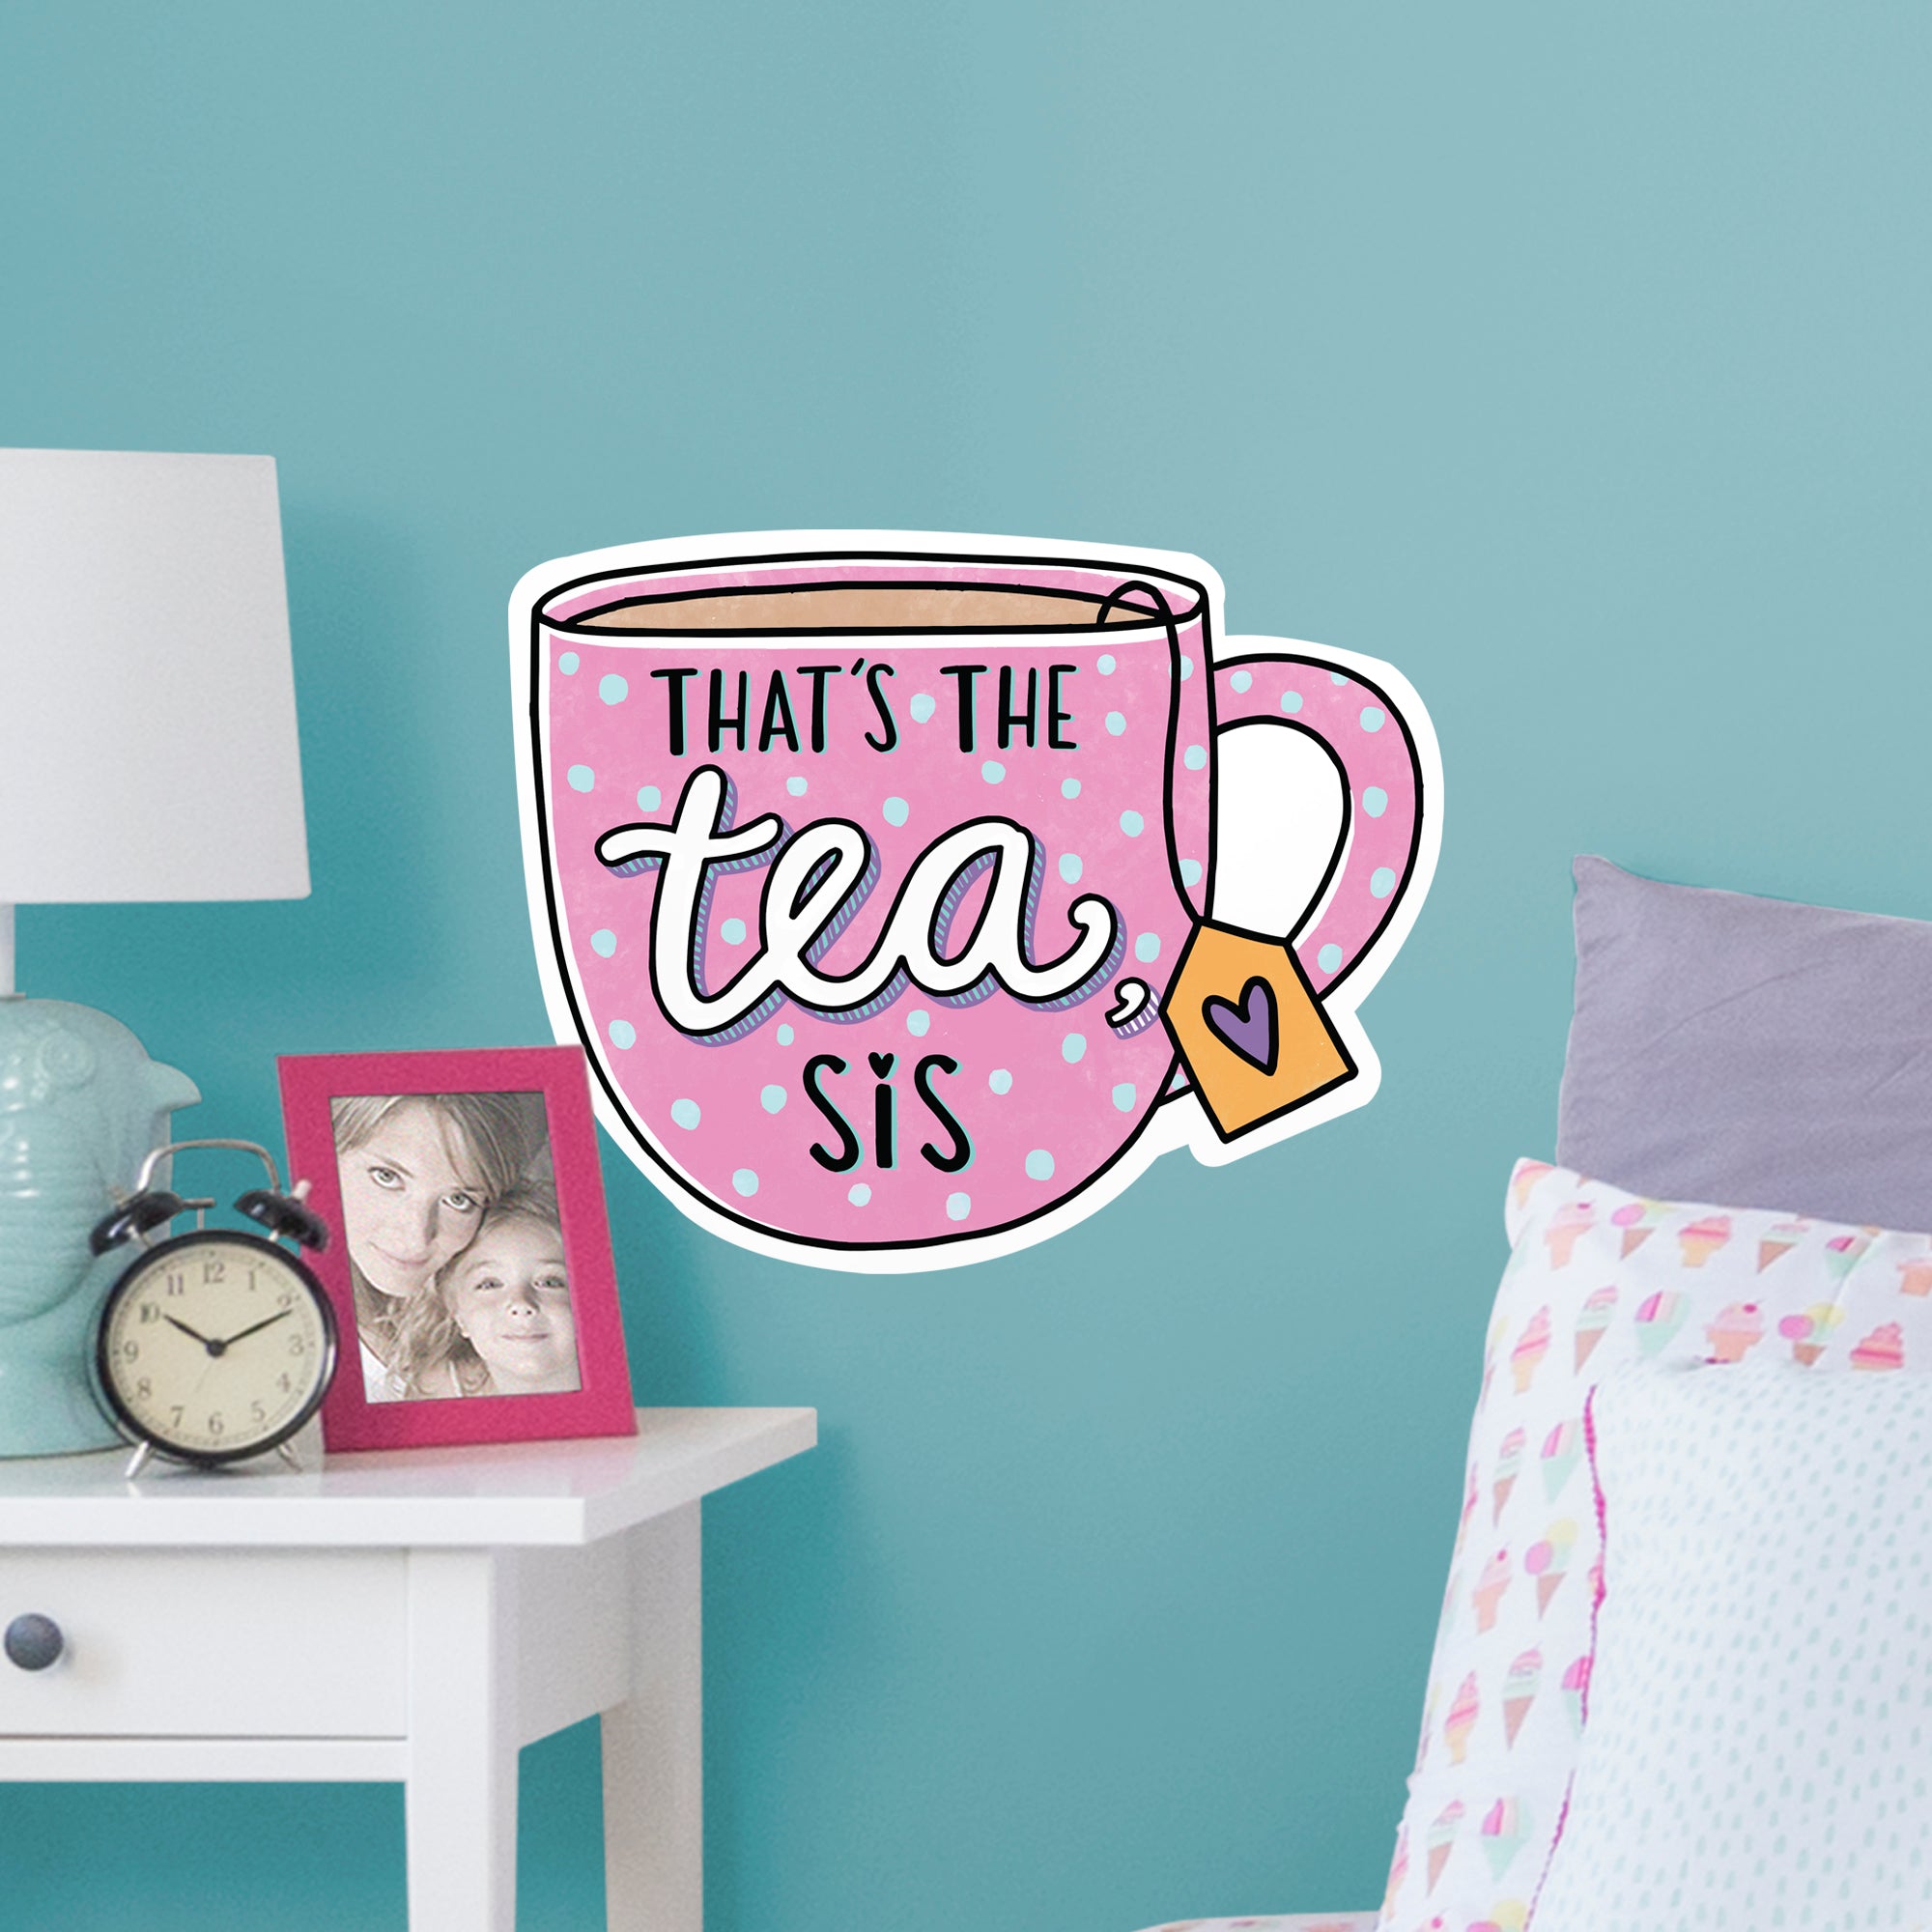 Thats The Tea Sis - Officially Licensed Big Moods Removable Wall Decal Large by Fathead | Vinyl